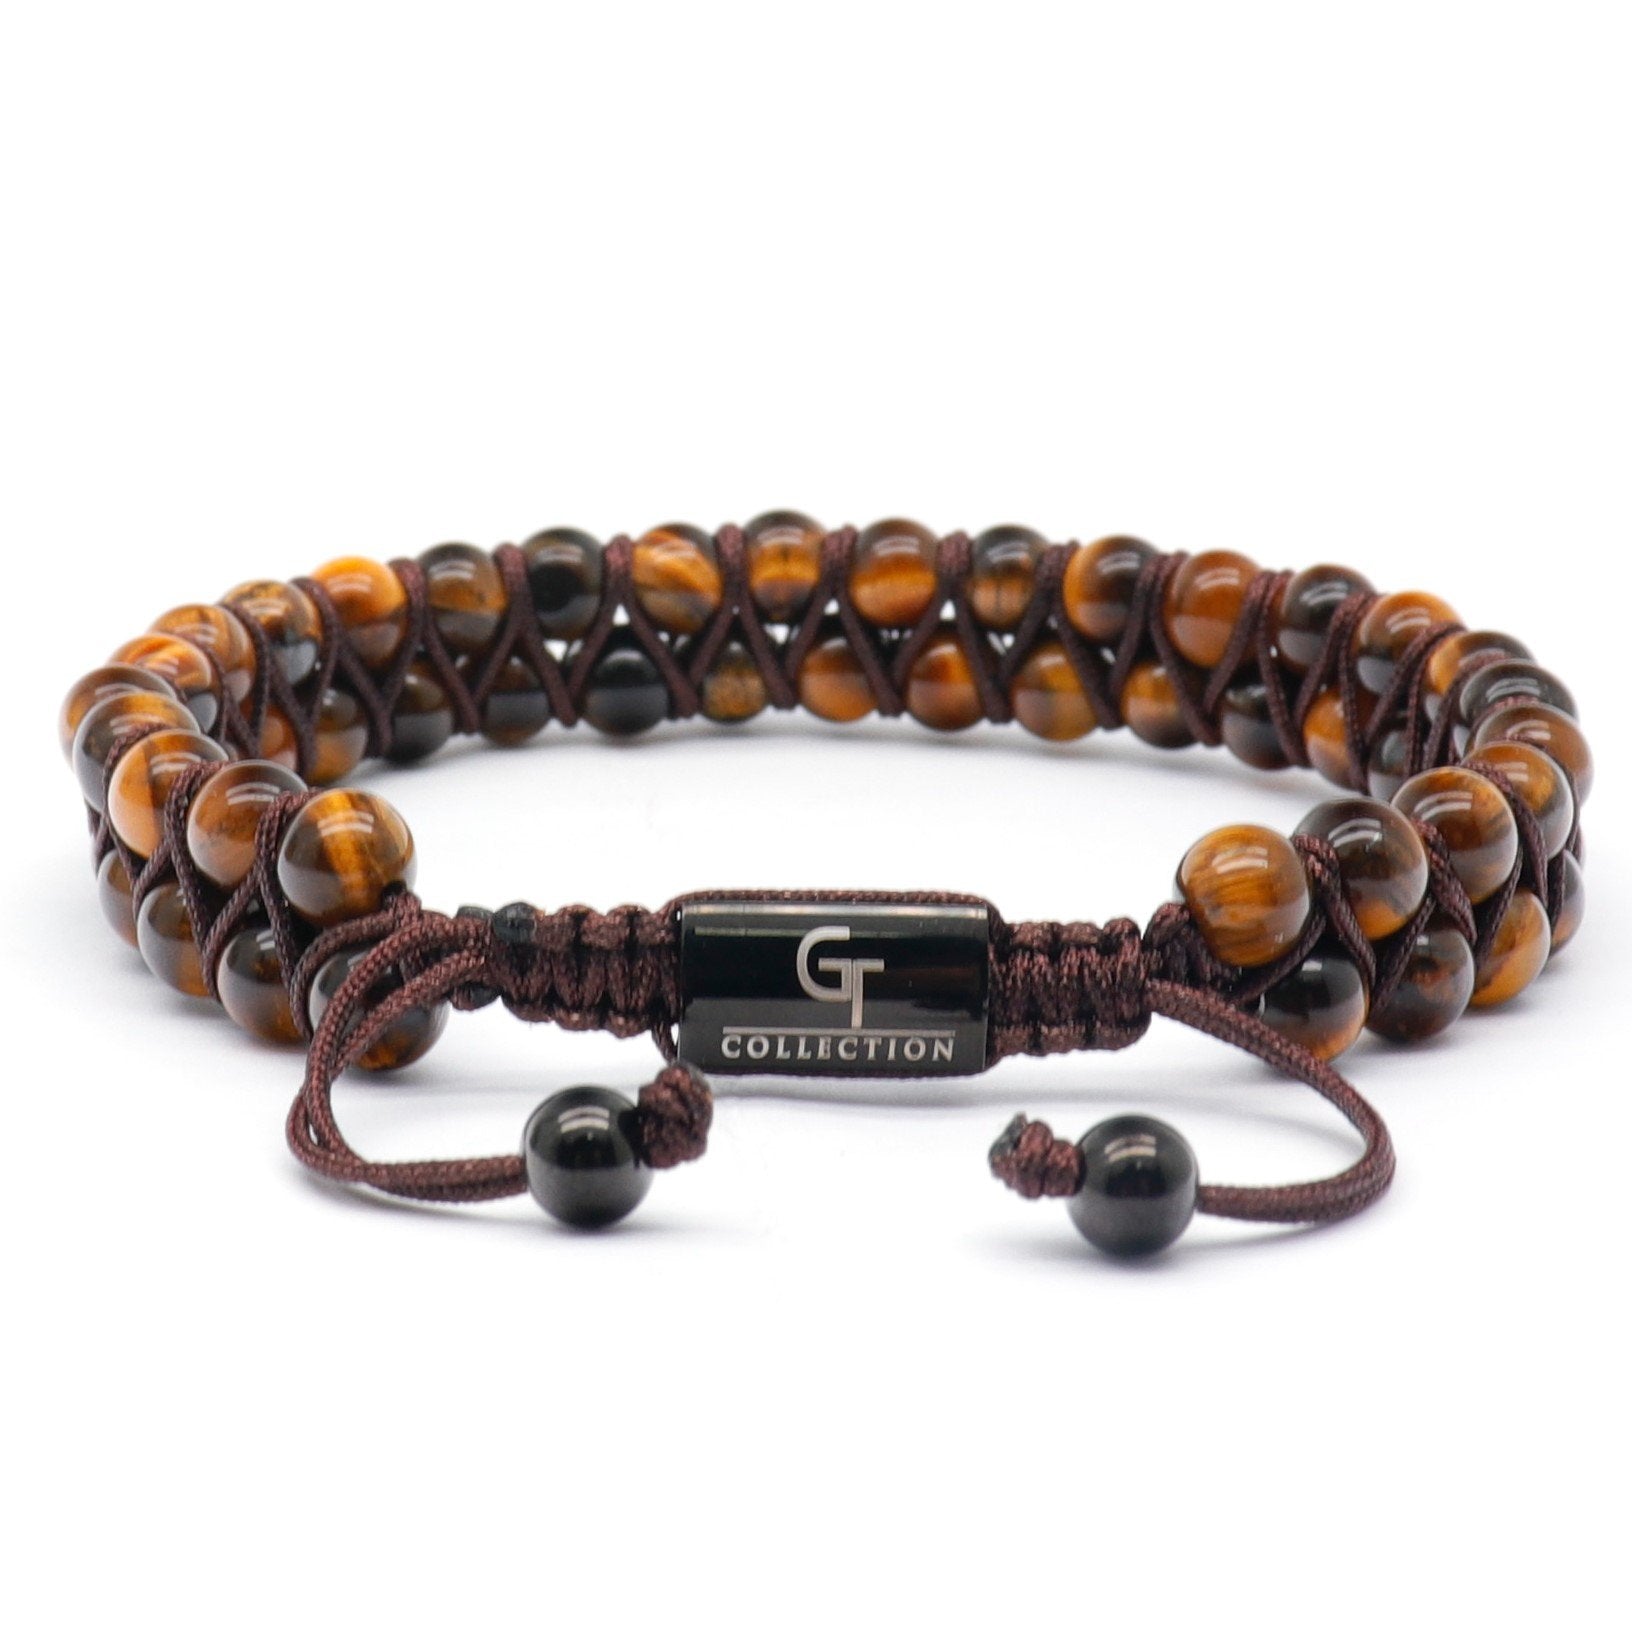 Tiger's Eye Beads for Sale